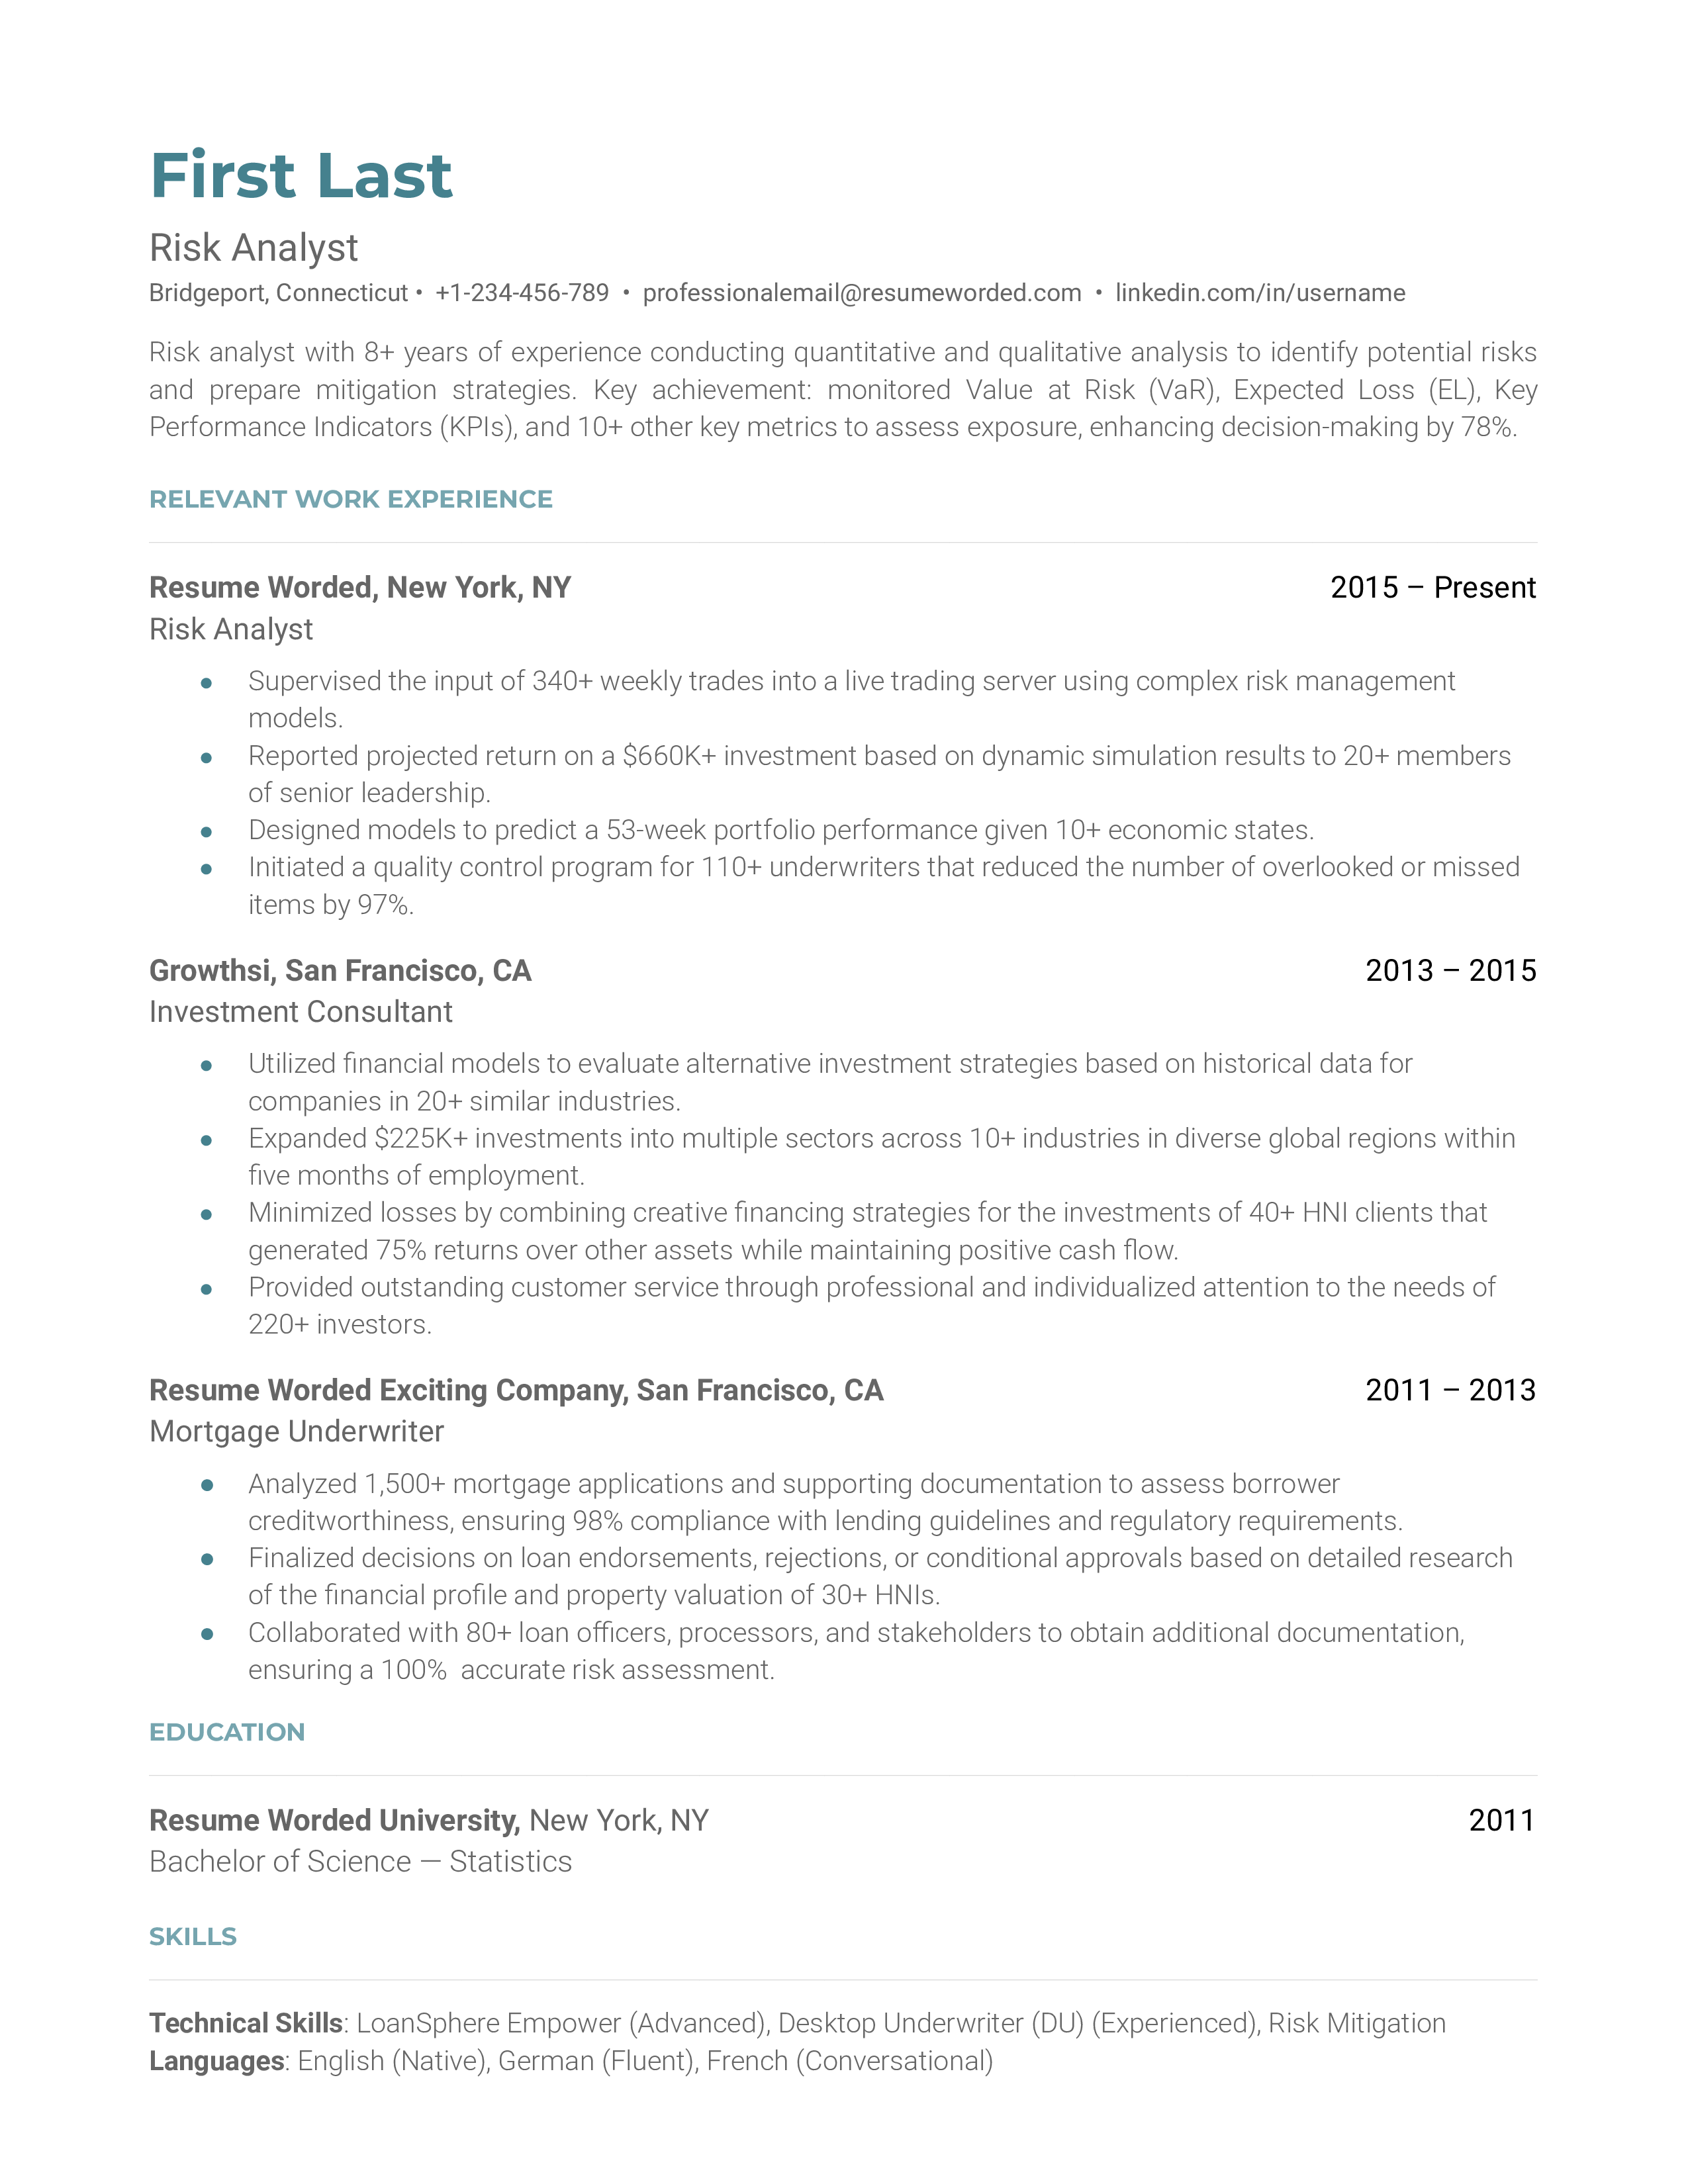 Professional resume for a Risk Analyst highlighting regulatory knowledge and data analysis skills.